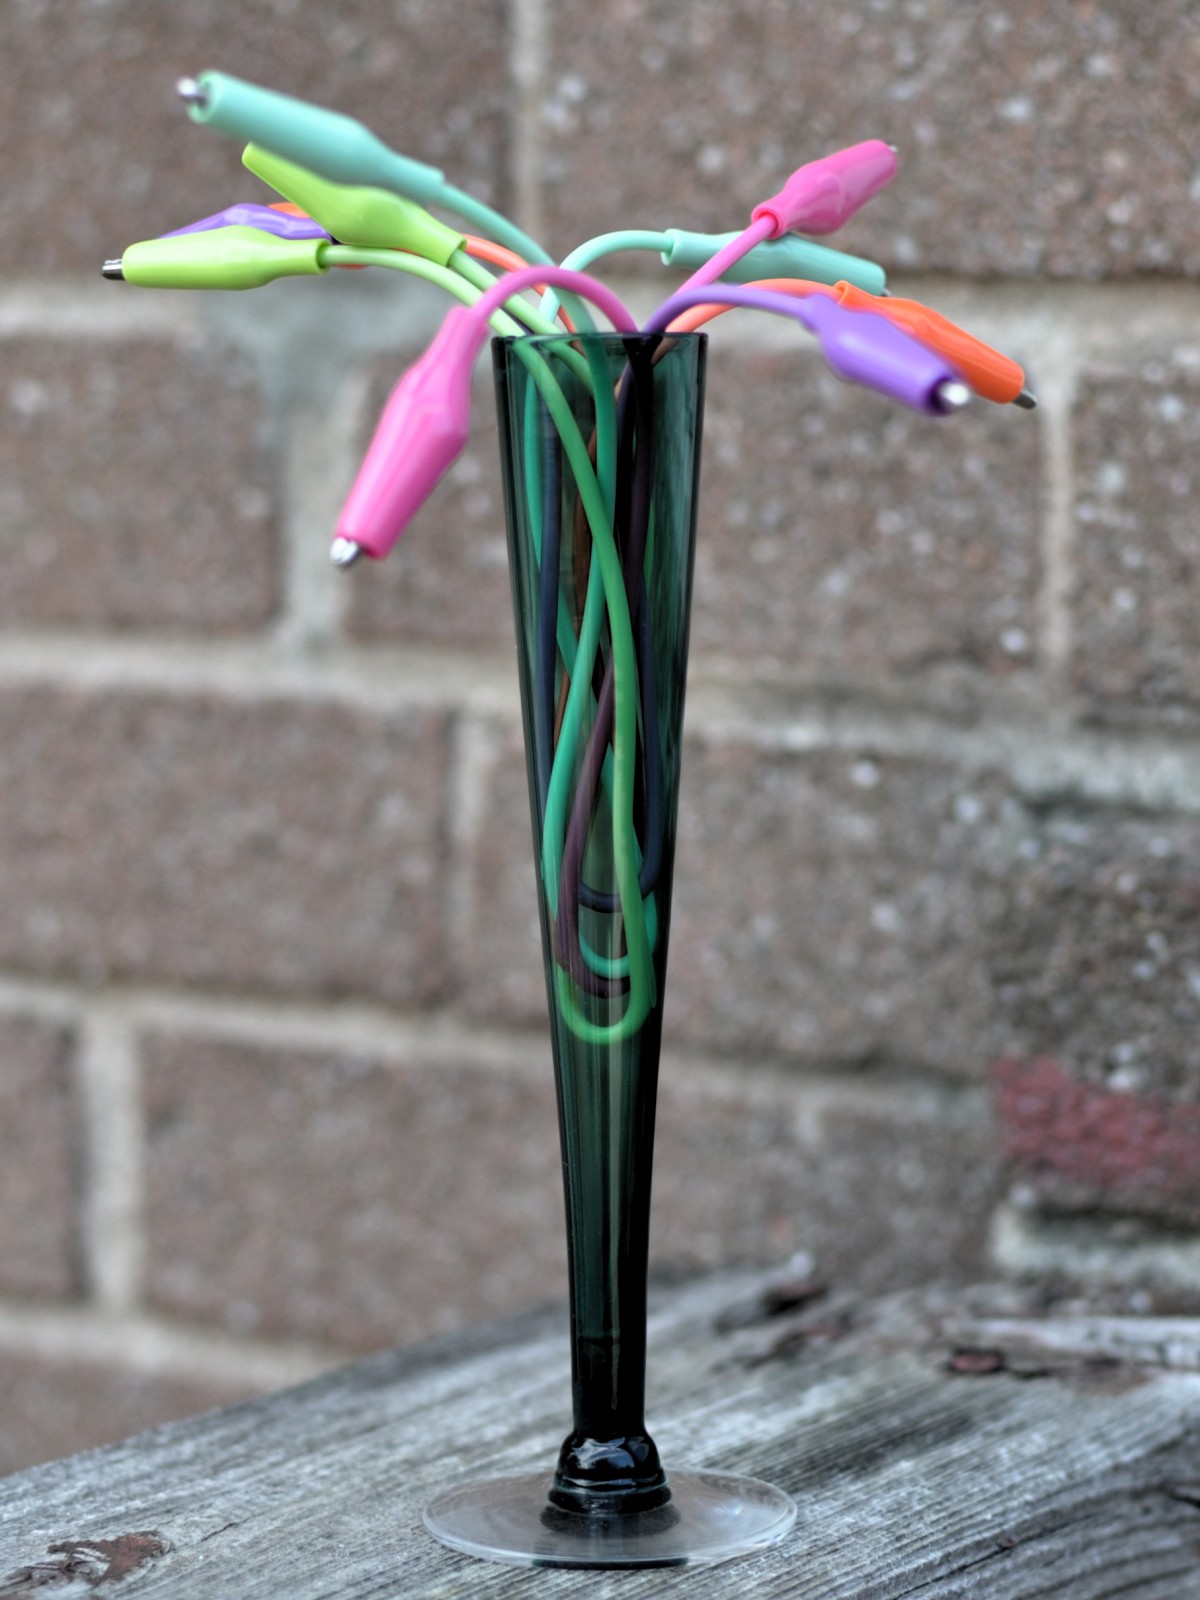 multi-colour alligator clips arranged in a green bud vase as if they were flowering buds